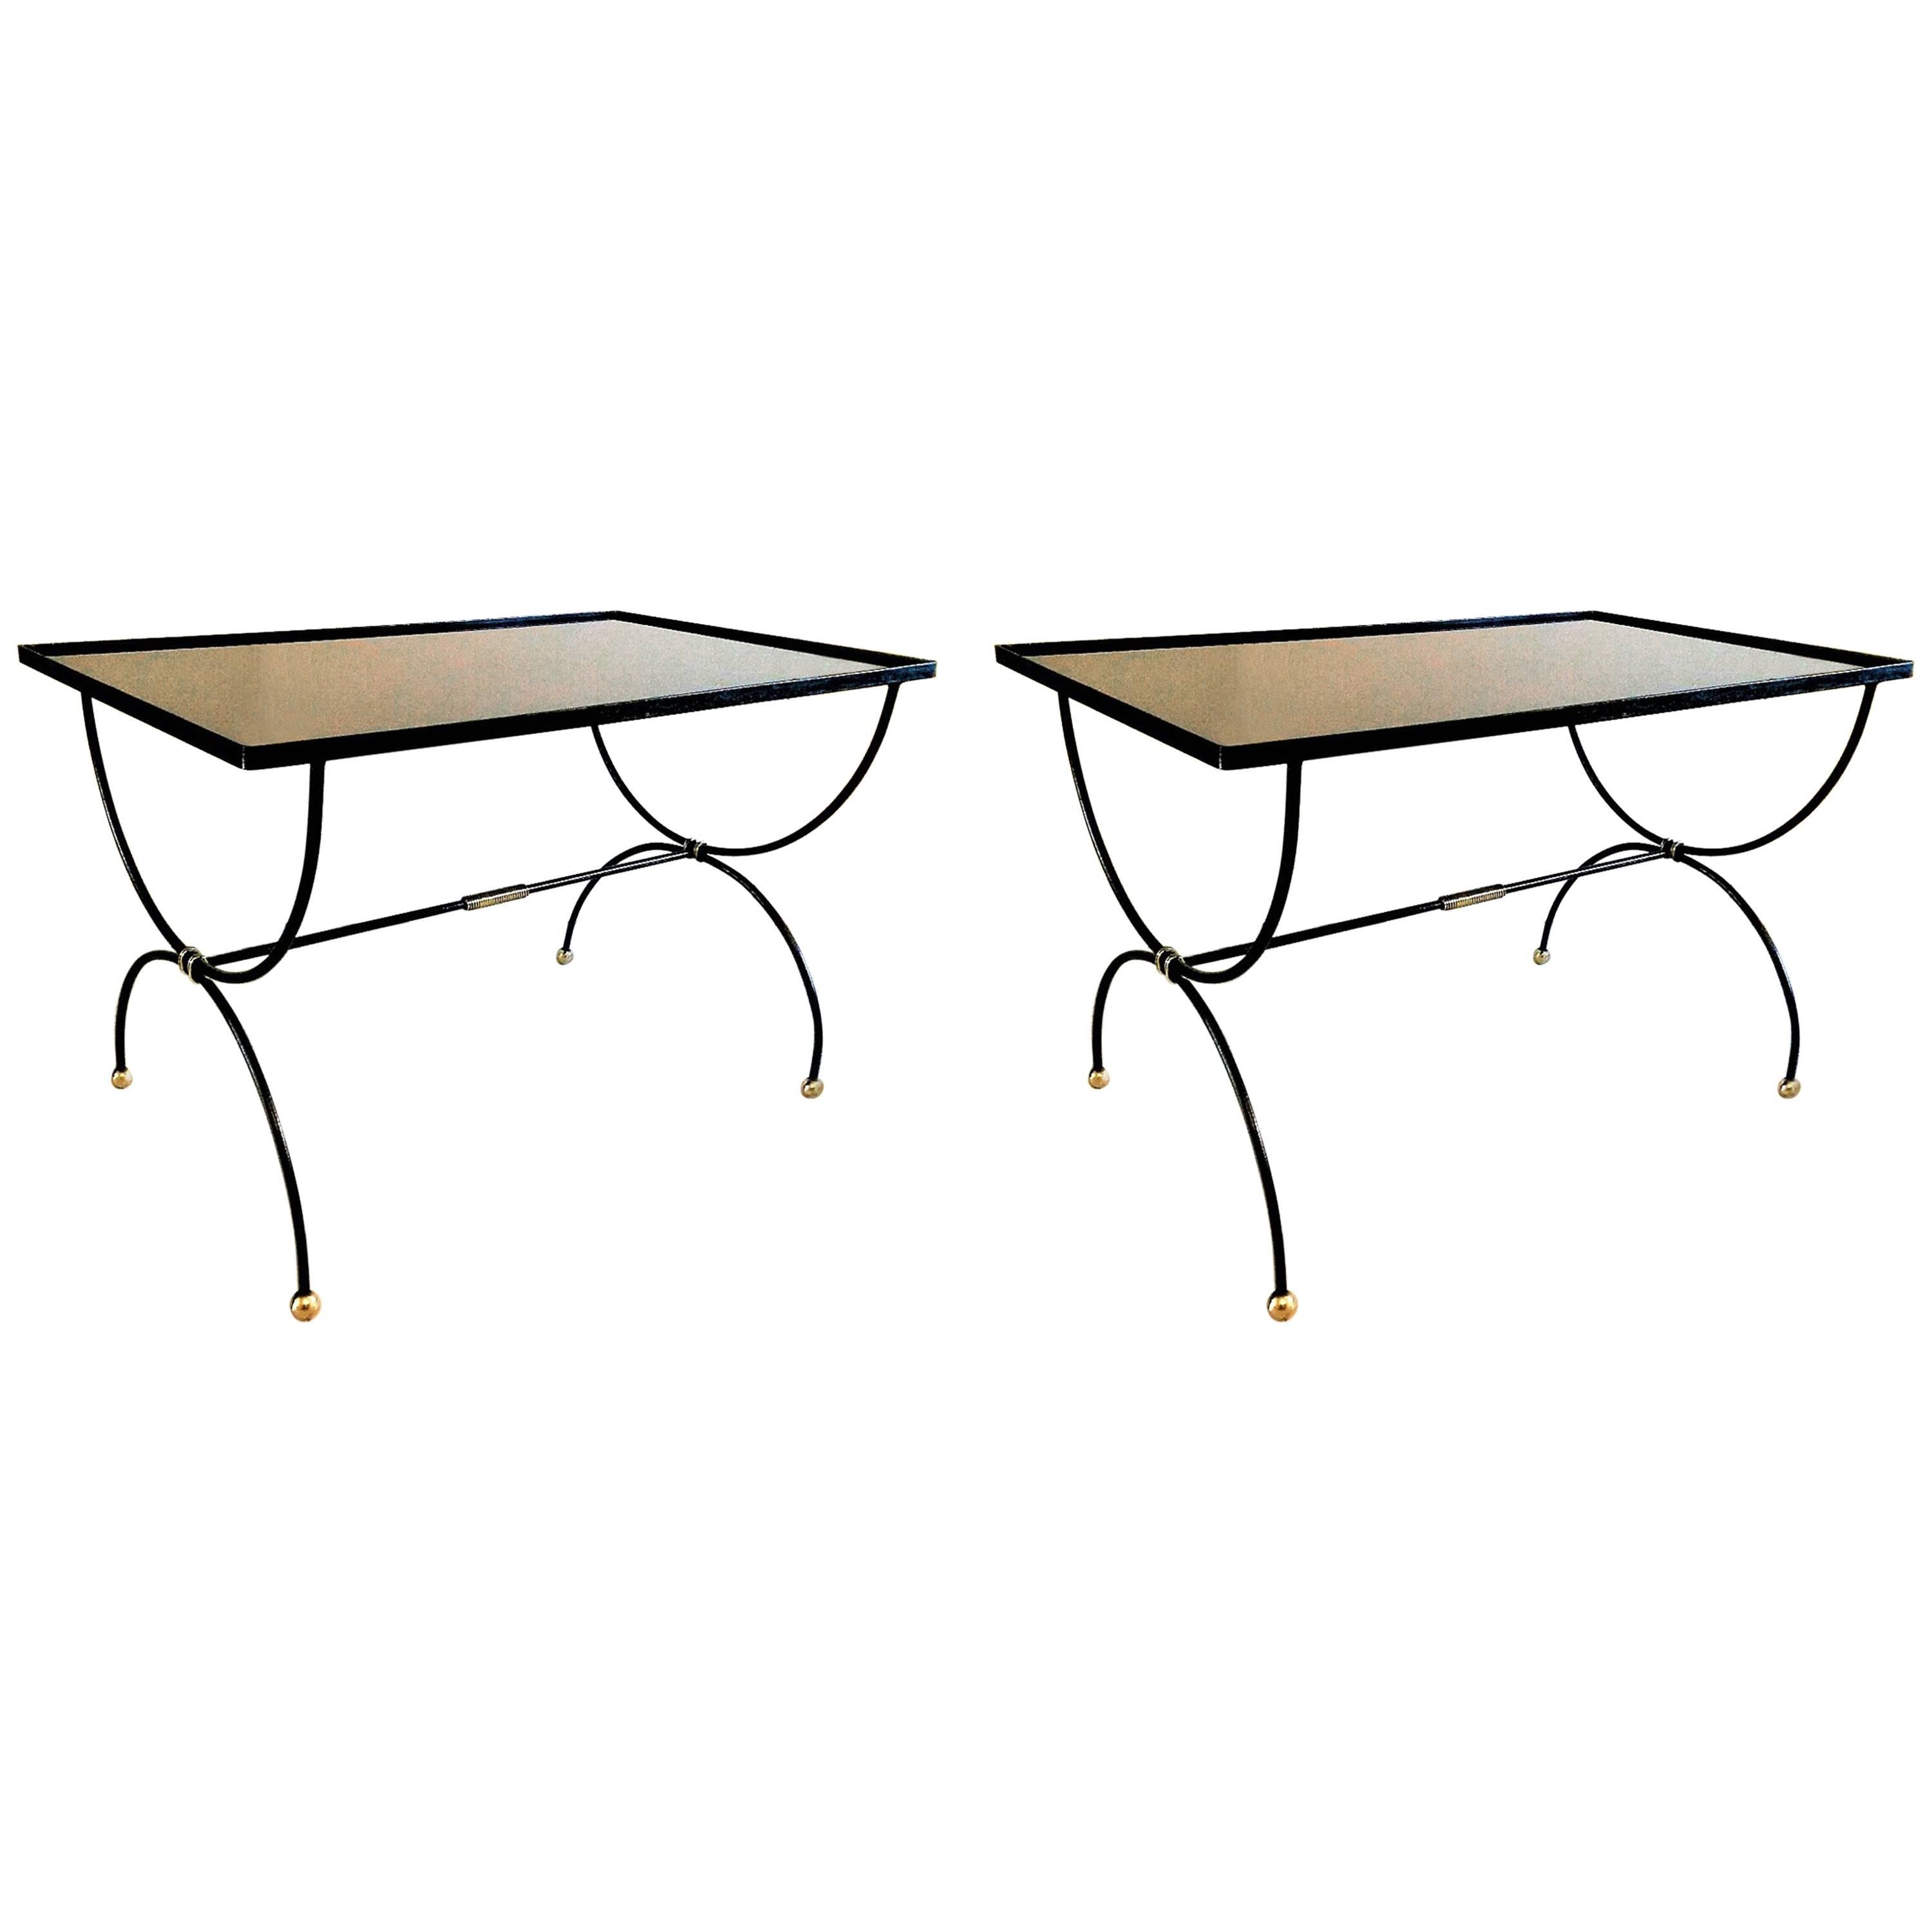 Two Mid-Century Modern French Coffee Center Tables by Maison Jansen, 1950s